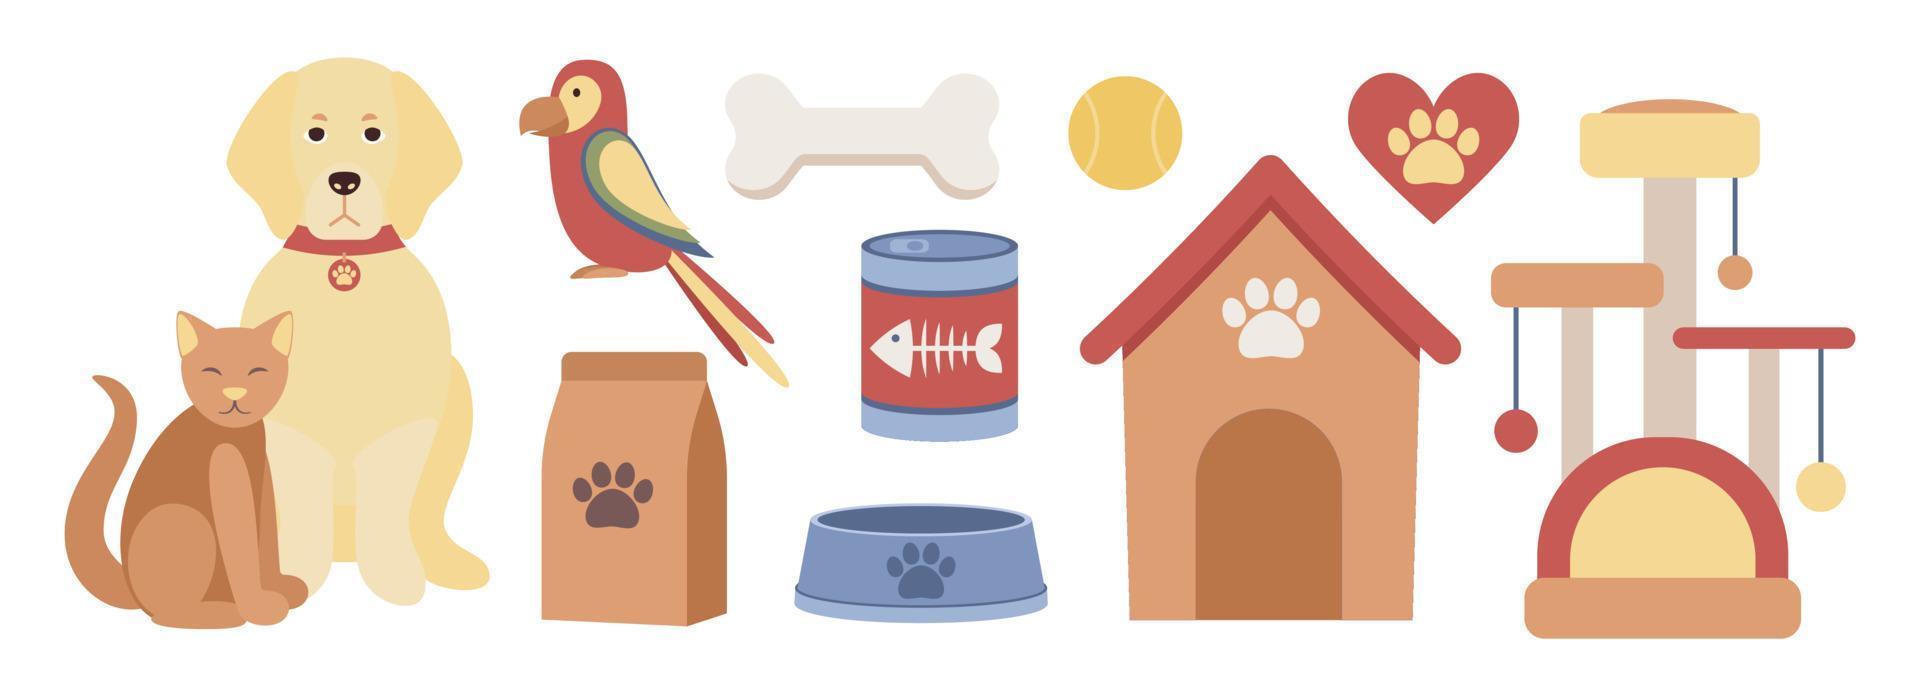 Pet shop icon set. Pet food, pet furniture, cat tower and scratching post, dog house, parrot, dog and cat and pet supplies. Vector flat illustration